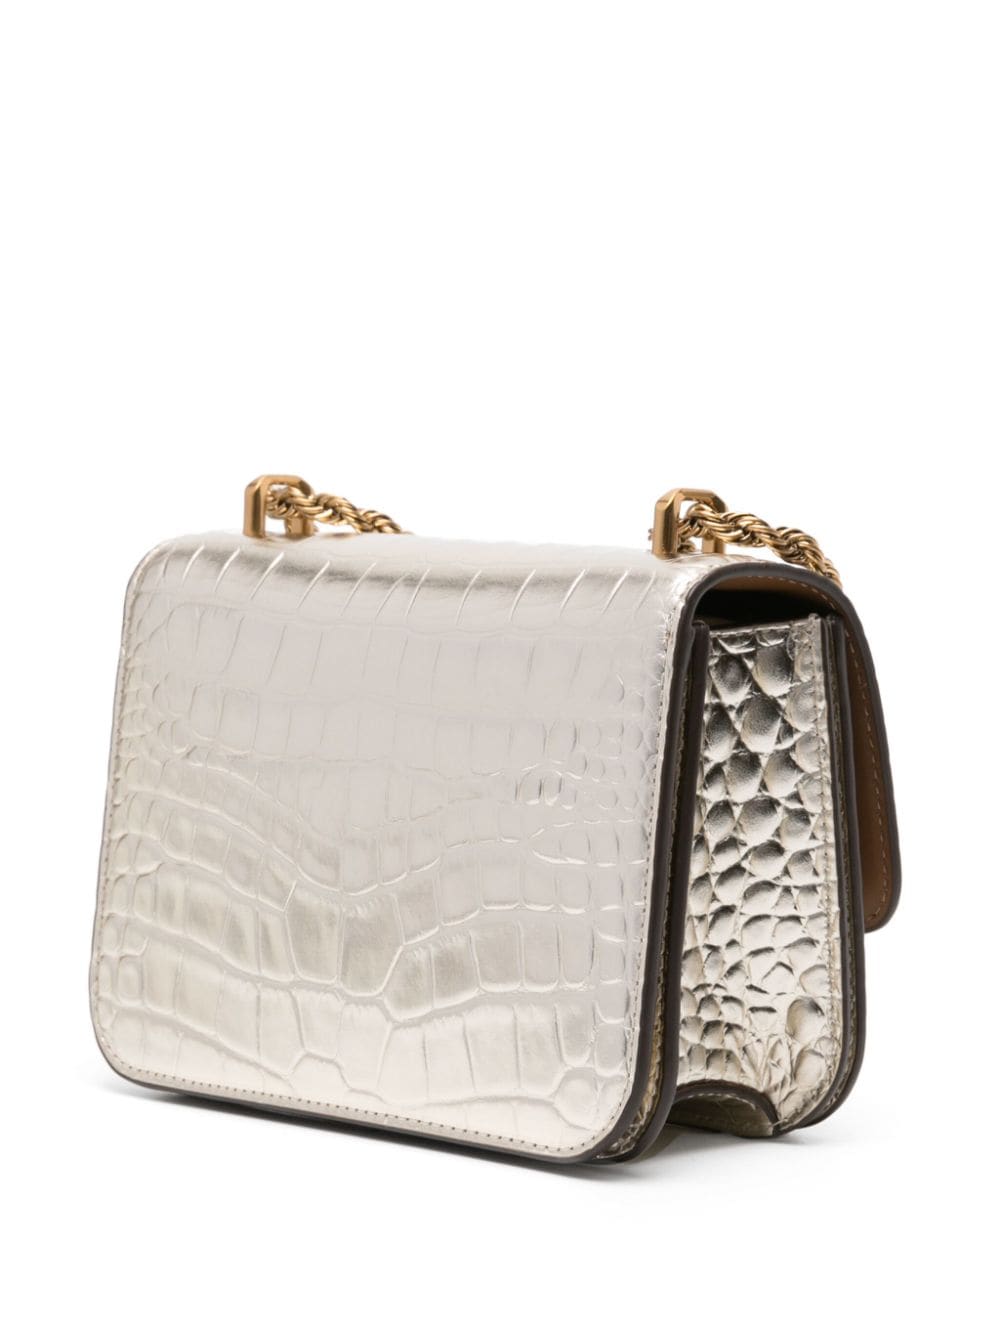 TORY BURCH Eleanor Small Champagne Gold Leather Shoulder Bag with Metallic Crocodile Embossing